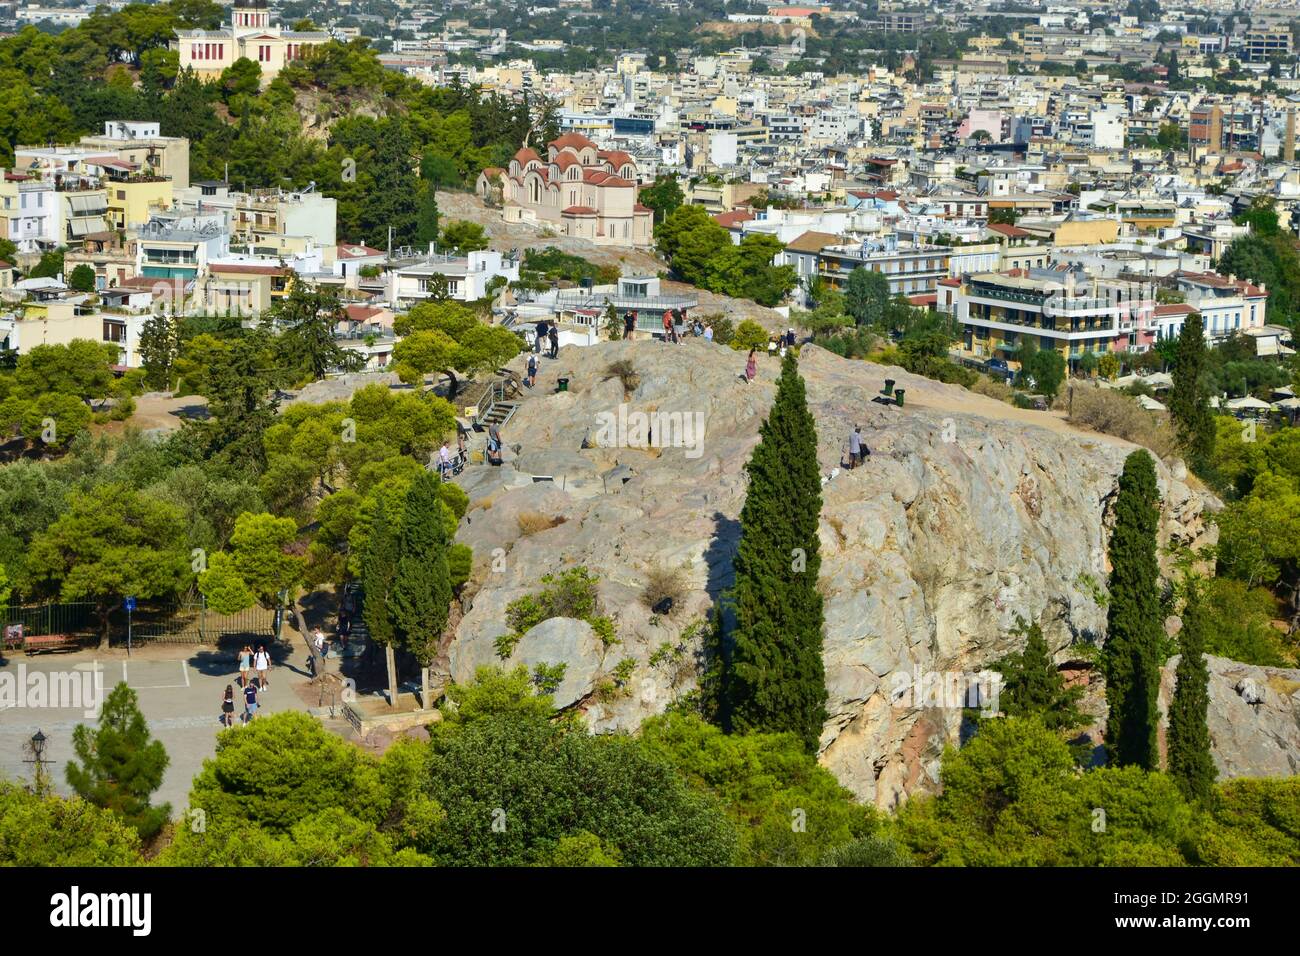 A view of the Areopagus or Mars Hill from the Acropolis in Athens, Greece Stock Photo